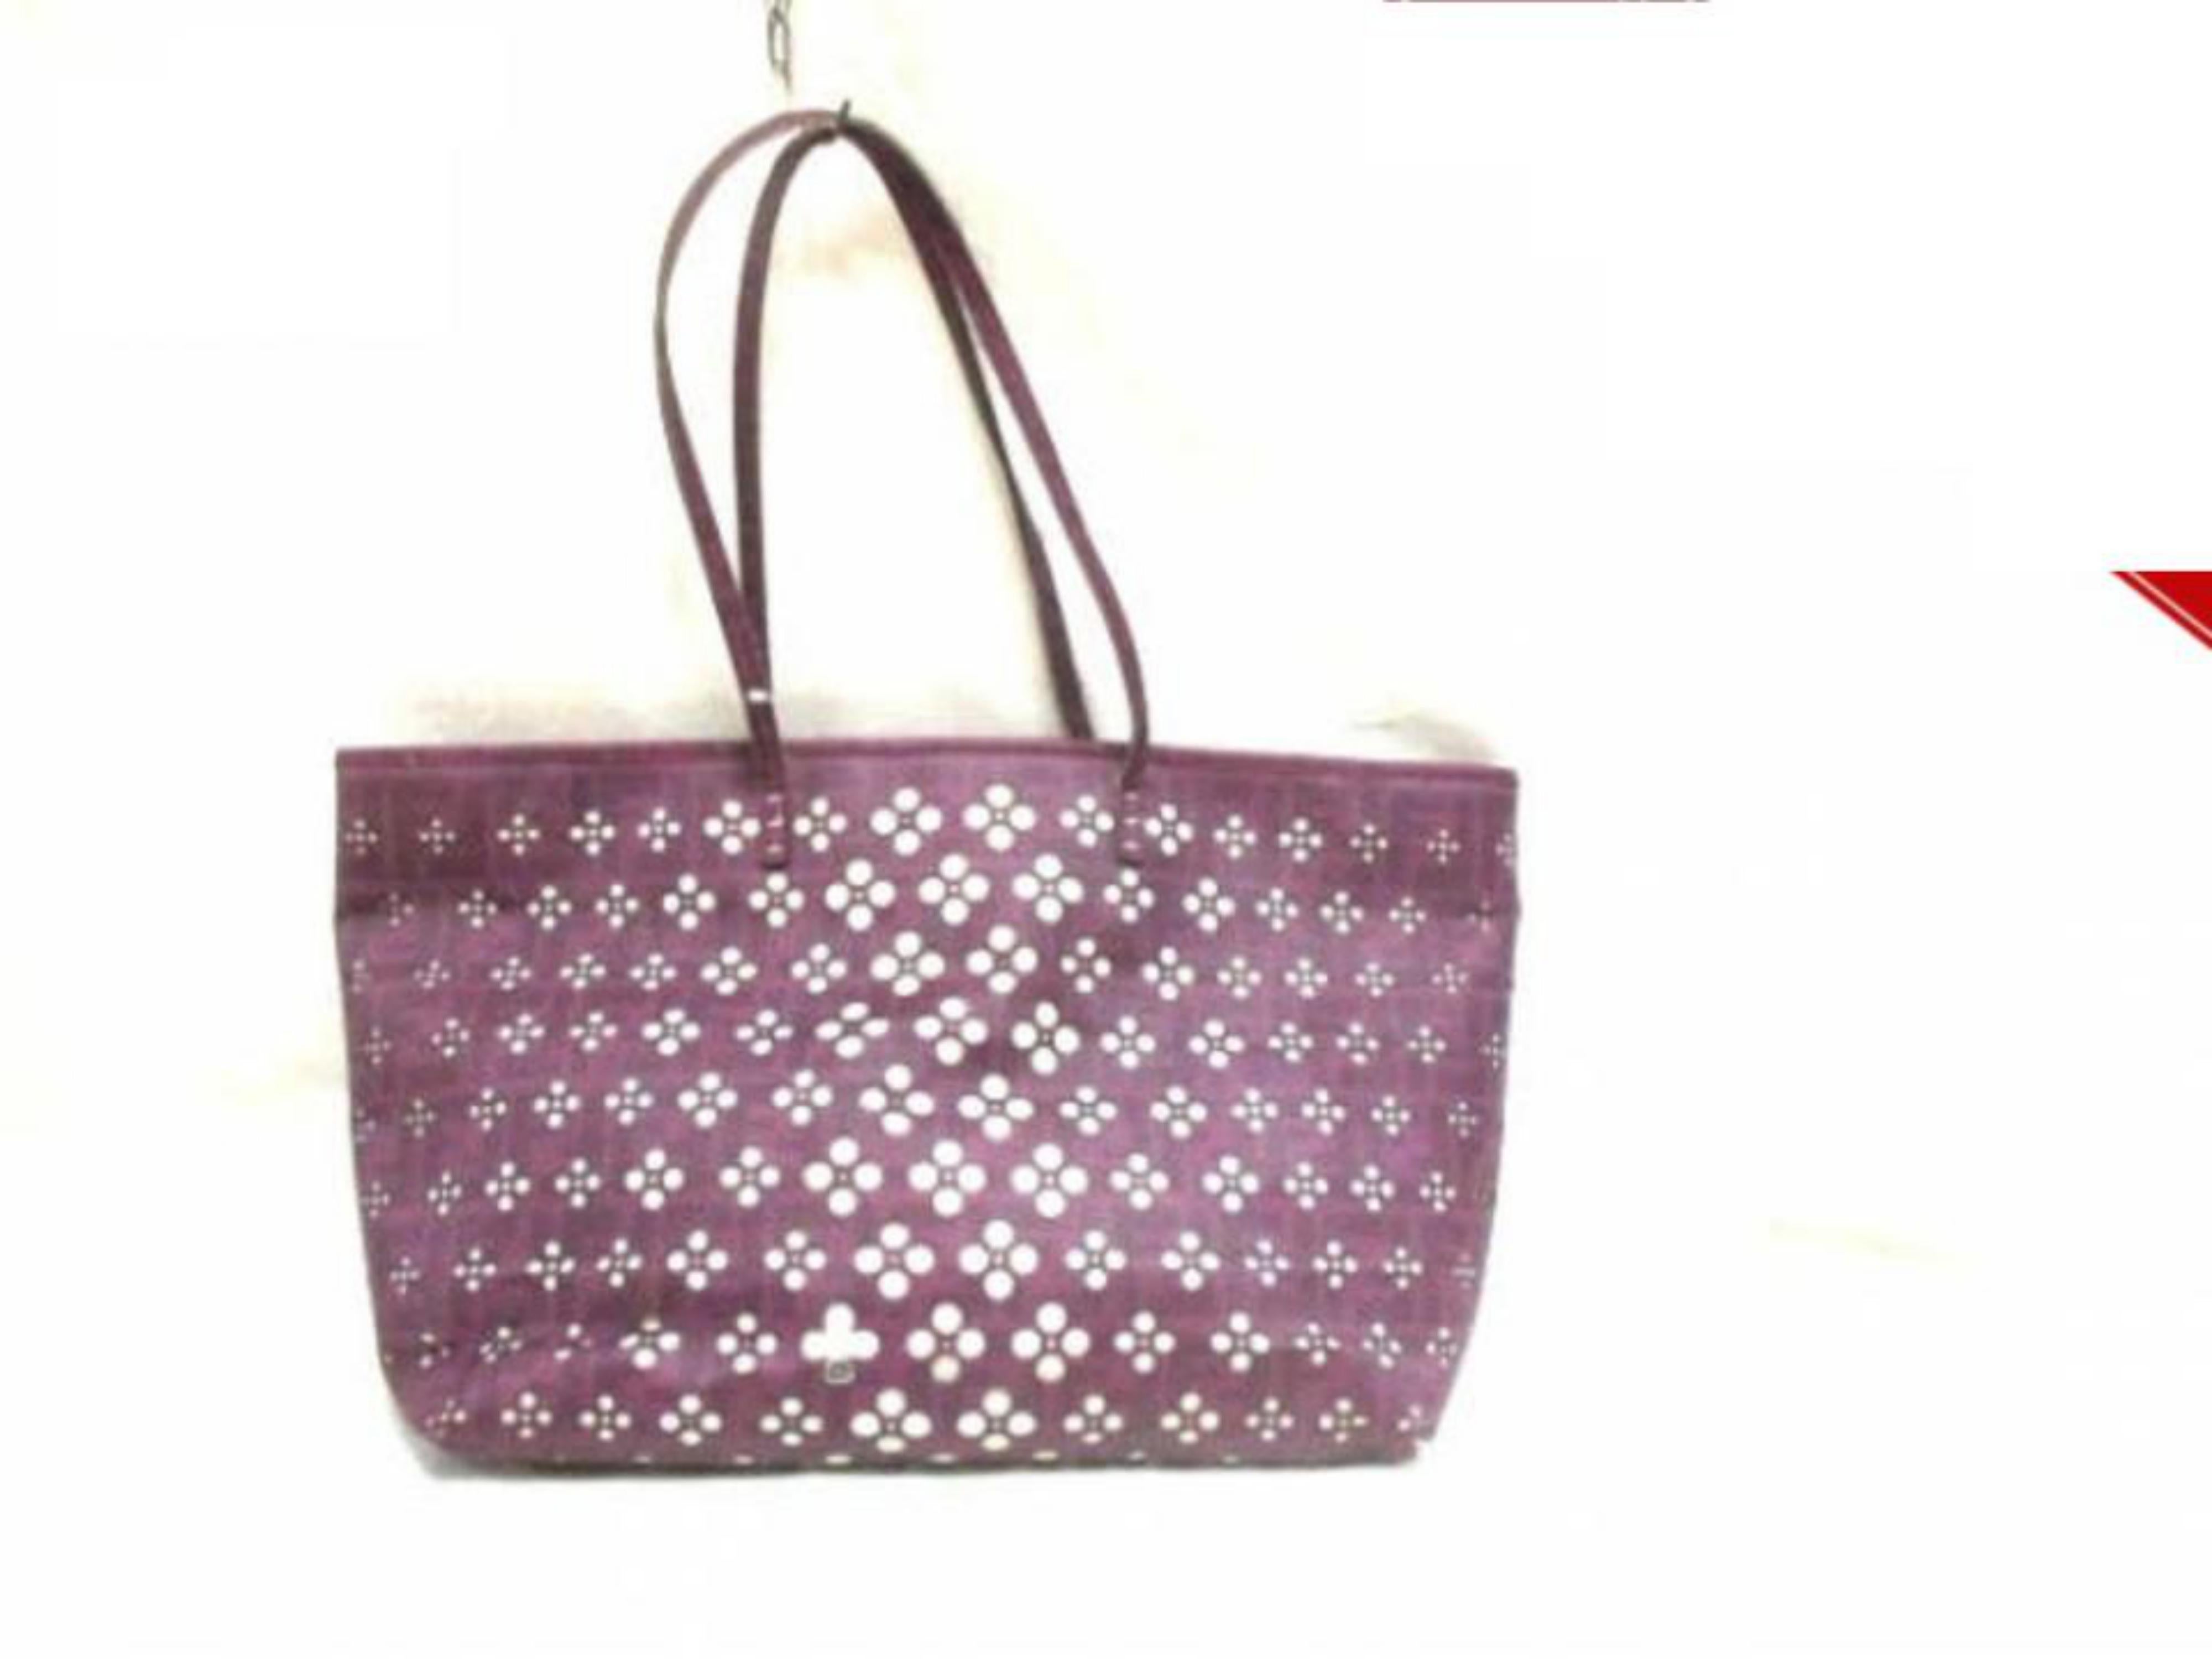 Fendi Perforated Laser Cut Out Tote 228077 Purple Coated Canvas Shoulder Bag For Sale 1